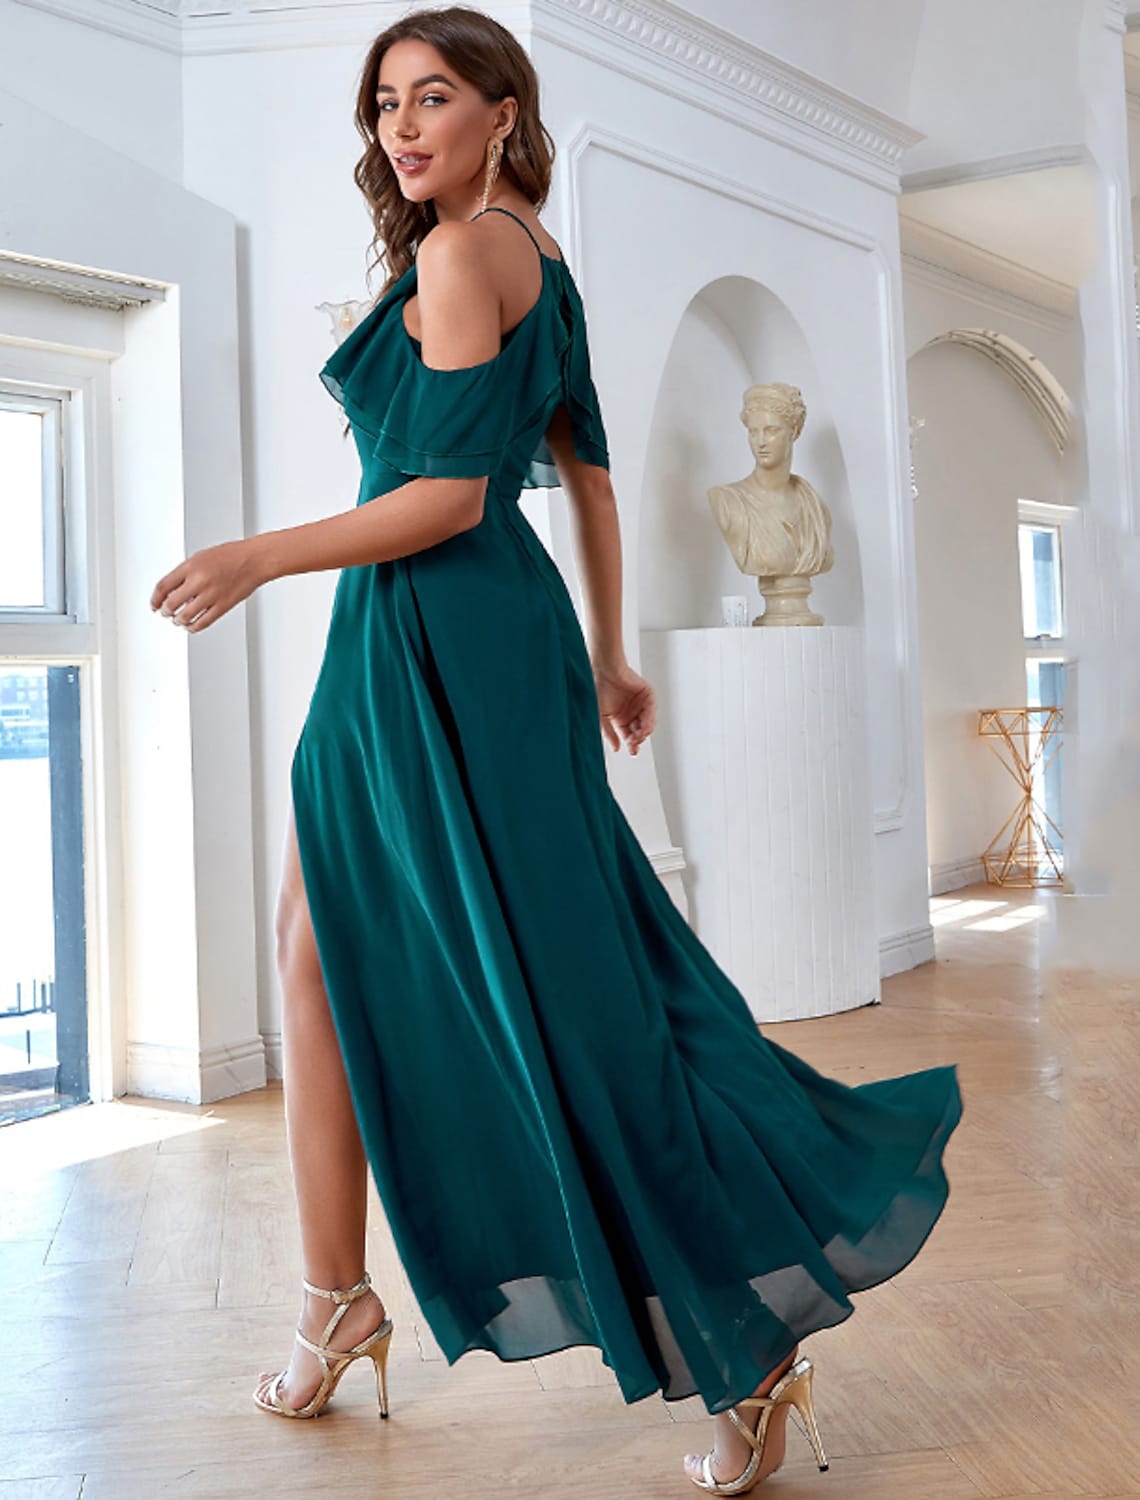 A-Line Elegant Vintage Party Wear Formal Evening Dress Strap Short Sleeve Ankle Length Chiffon with Ruffles Slit